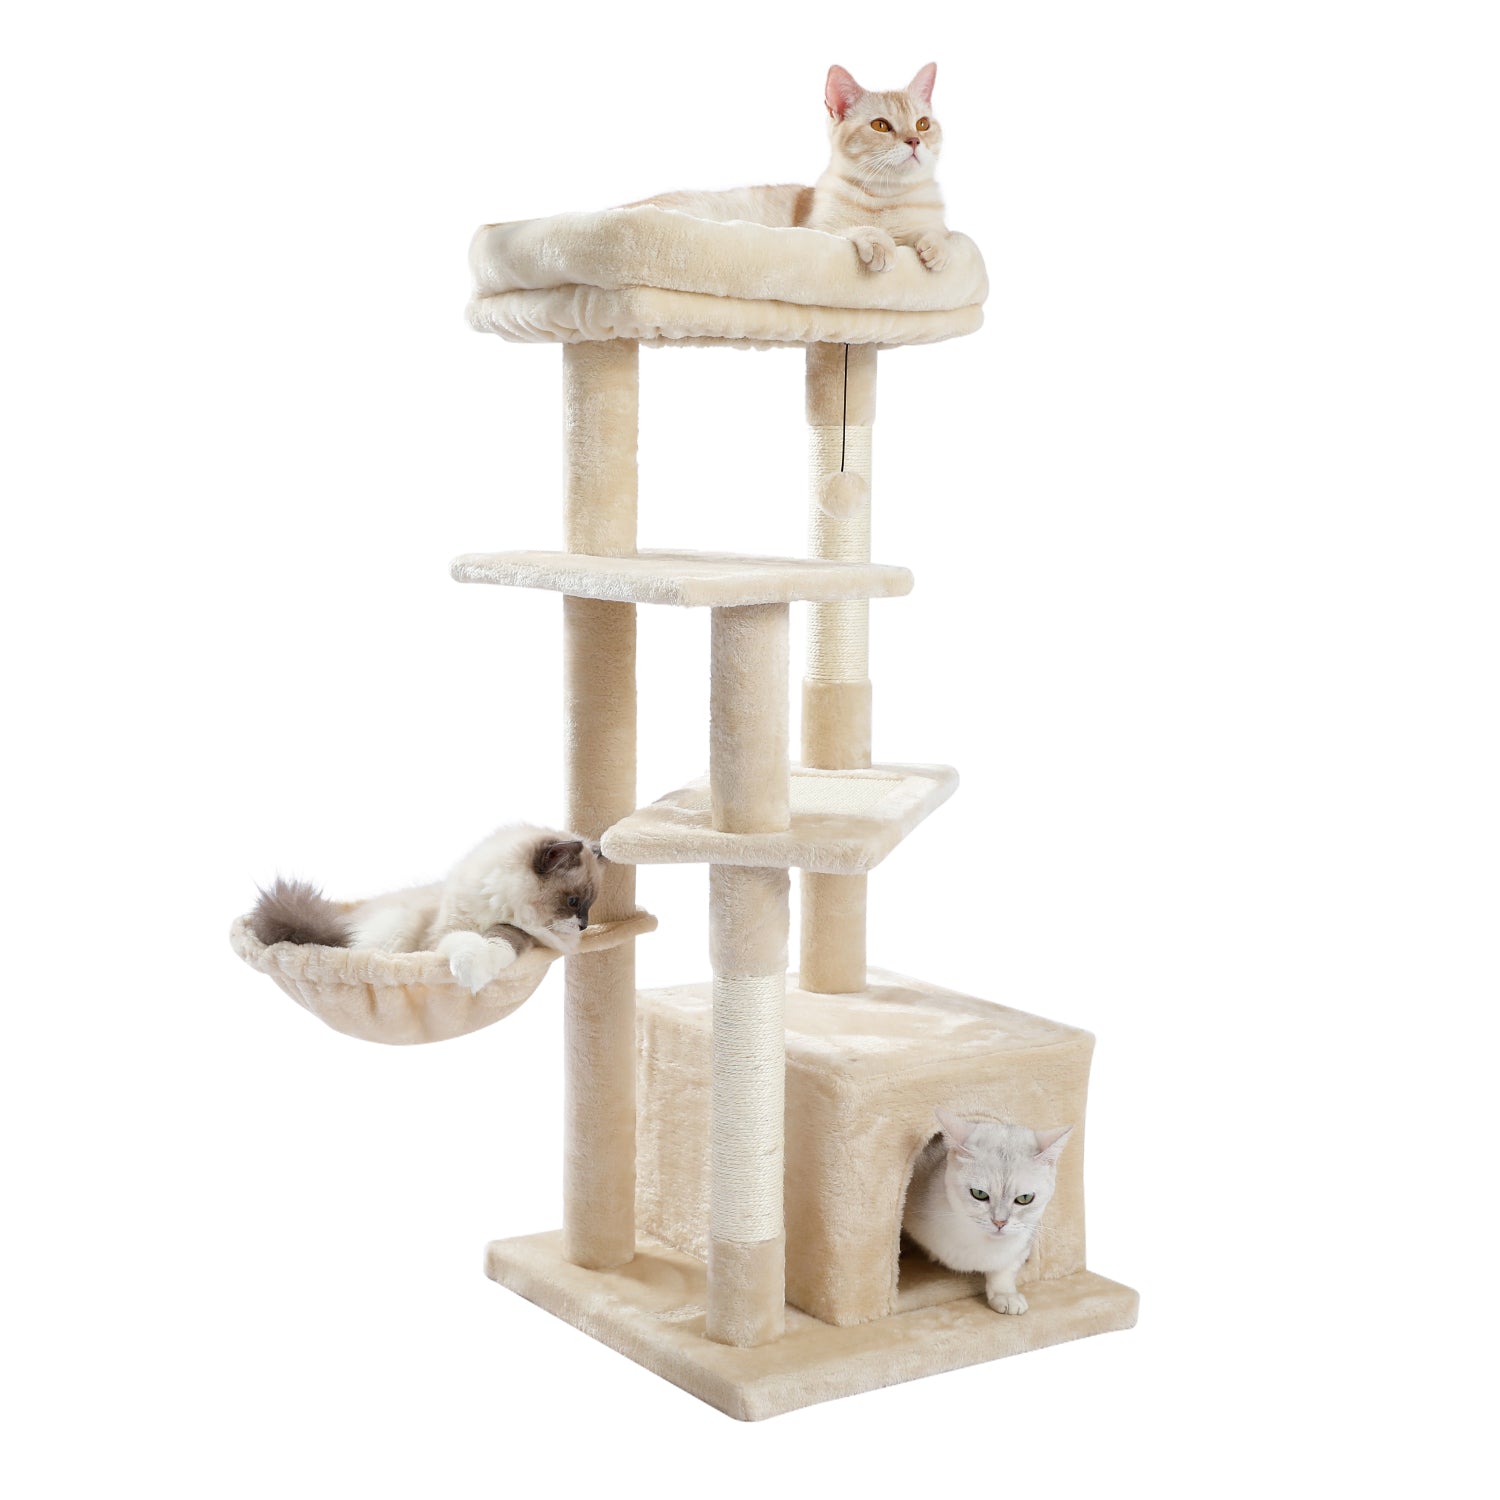 Multi-Level Modern Cat Tree with Scratching Post, Cozy Condo, Top Perch, Hammock and Dangling Ball For Small to Medium Cats